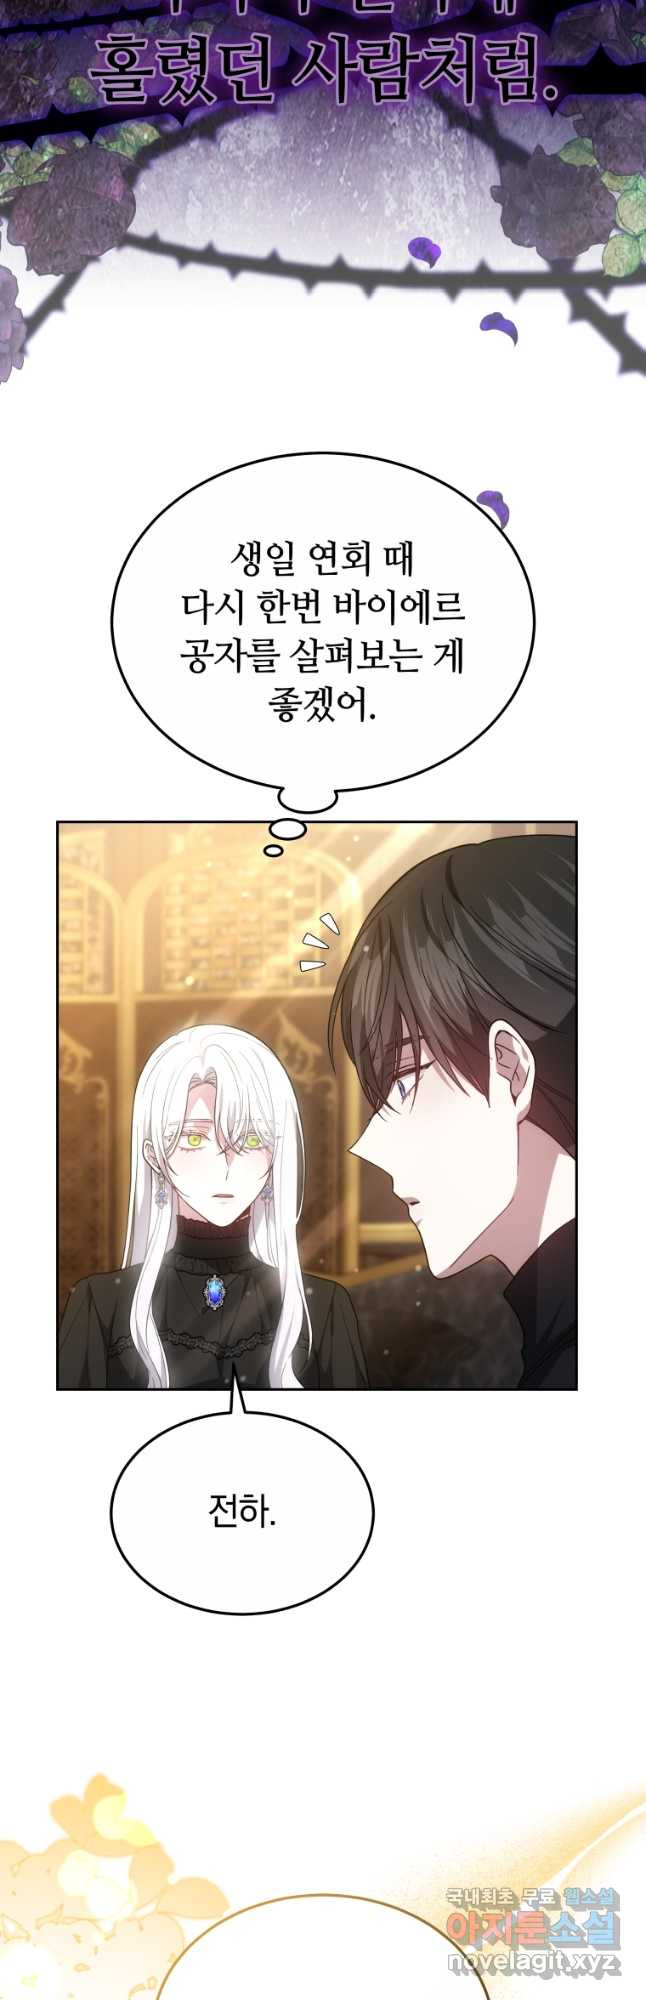 Beloved by the Male Leads Nephew - Chapter 49 - Page 26